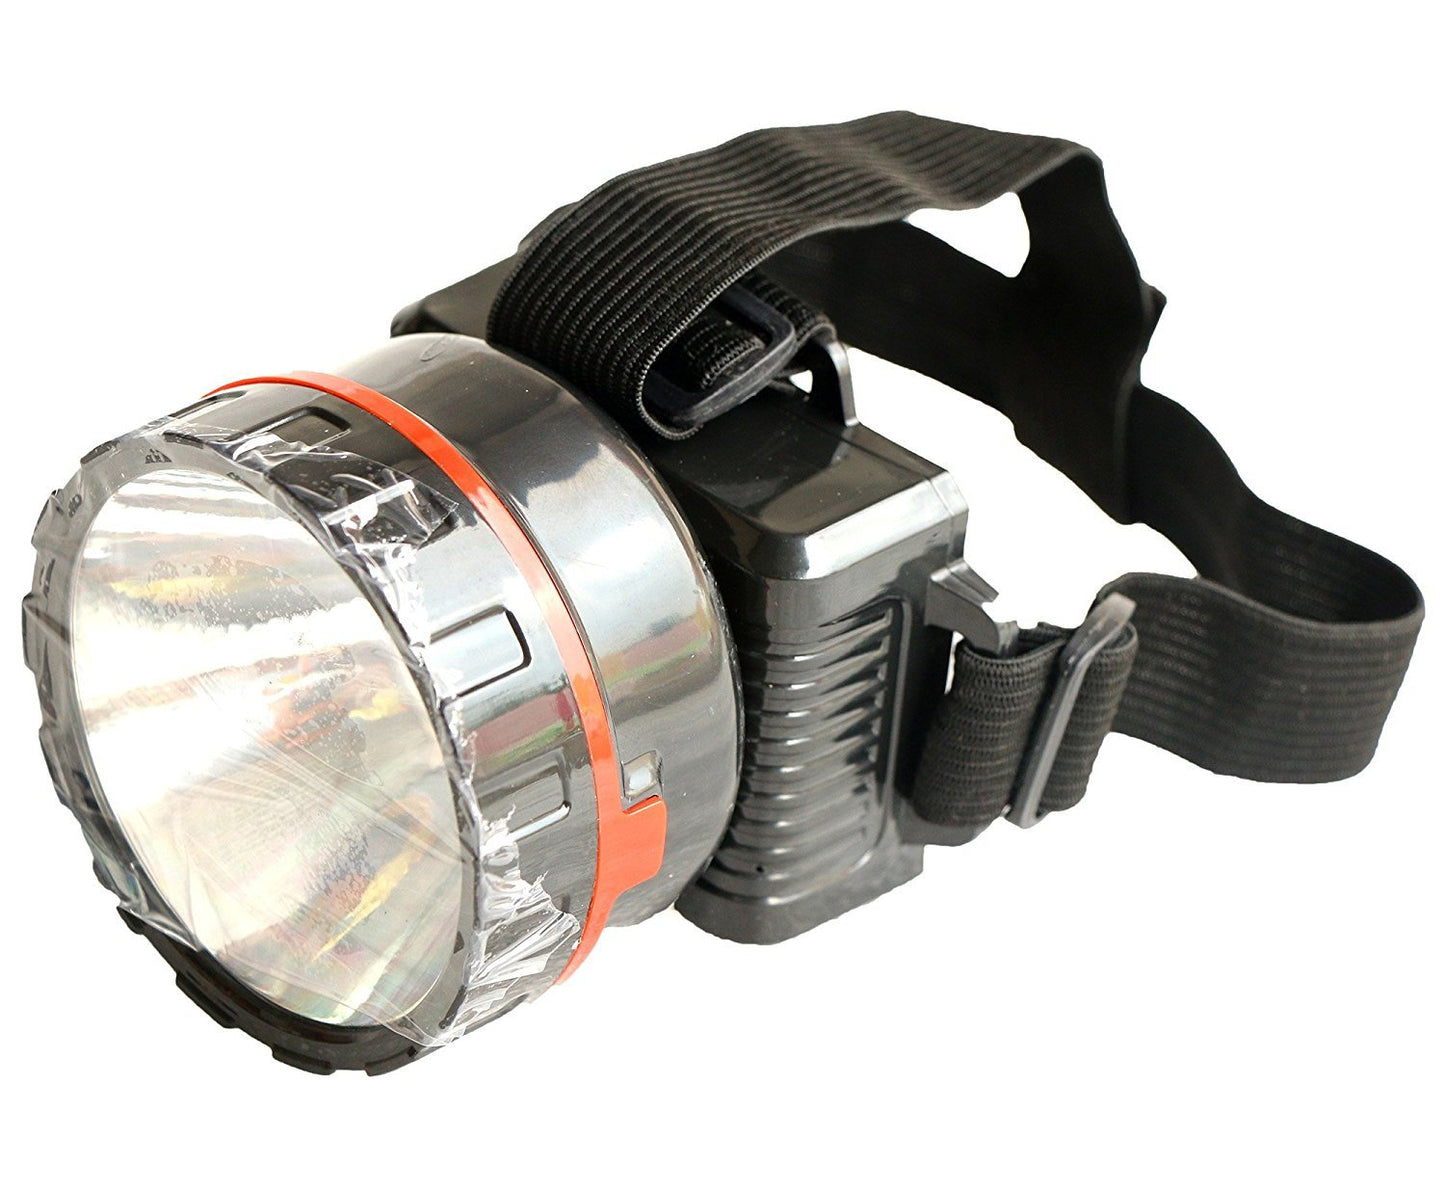 2W LED HEAD LAMP Rechargeable Bright Light